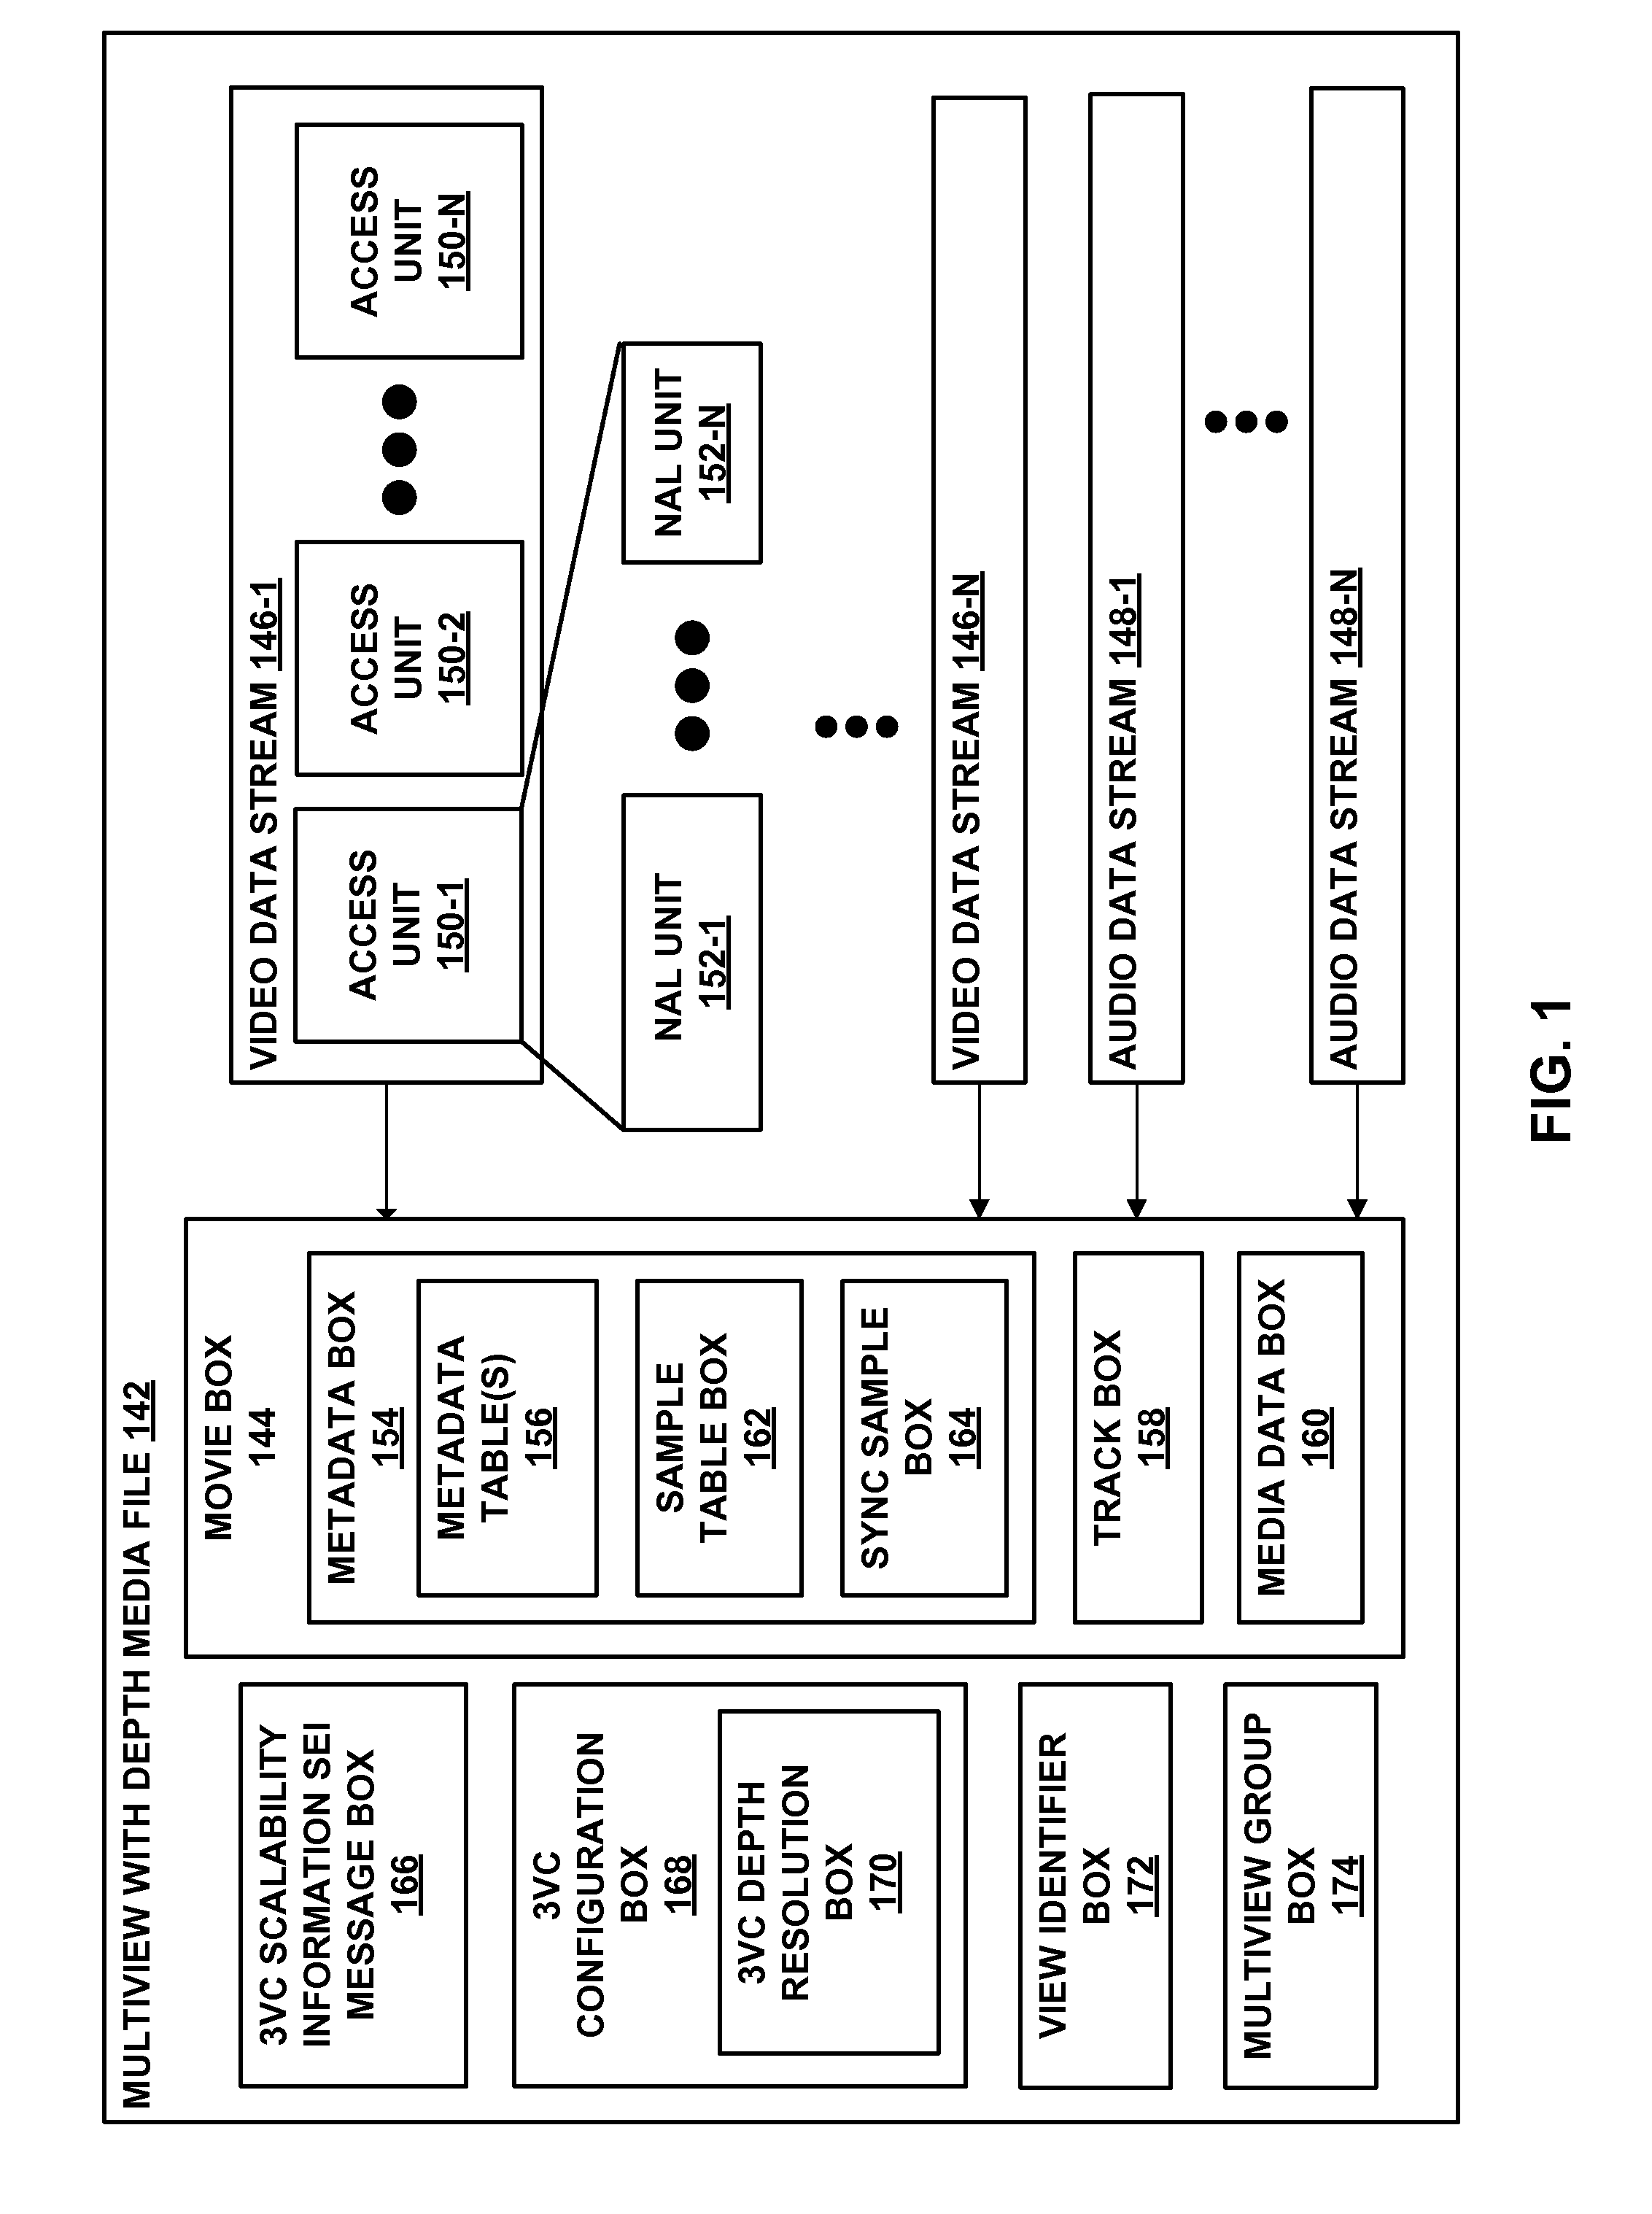 Signaling of spatial resolution of depth views in multiview coding file format